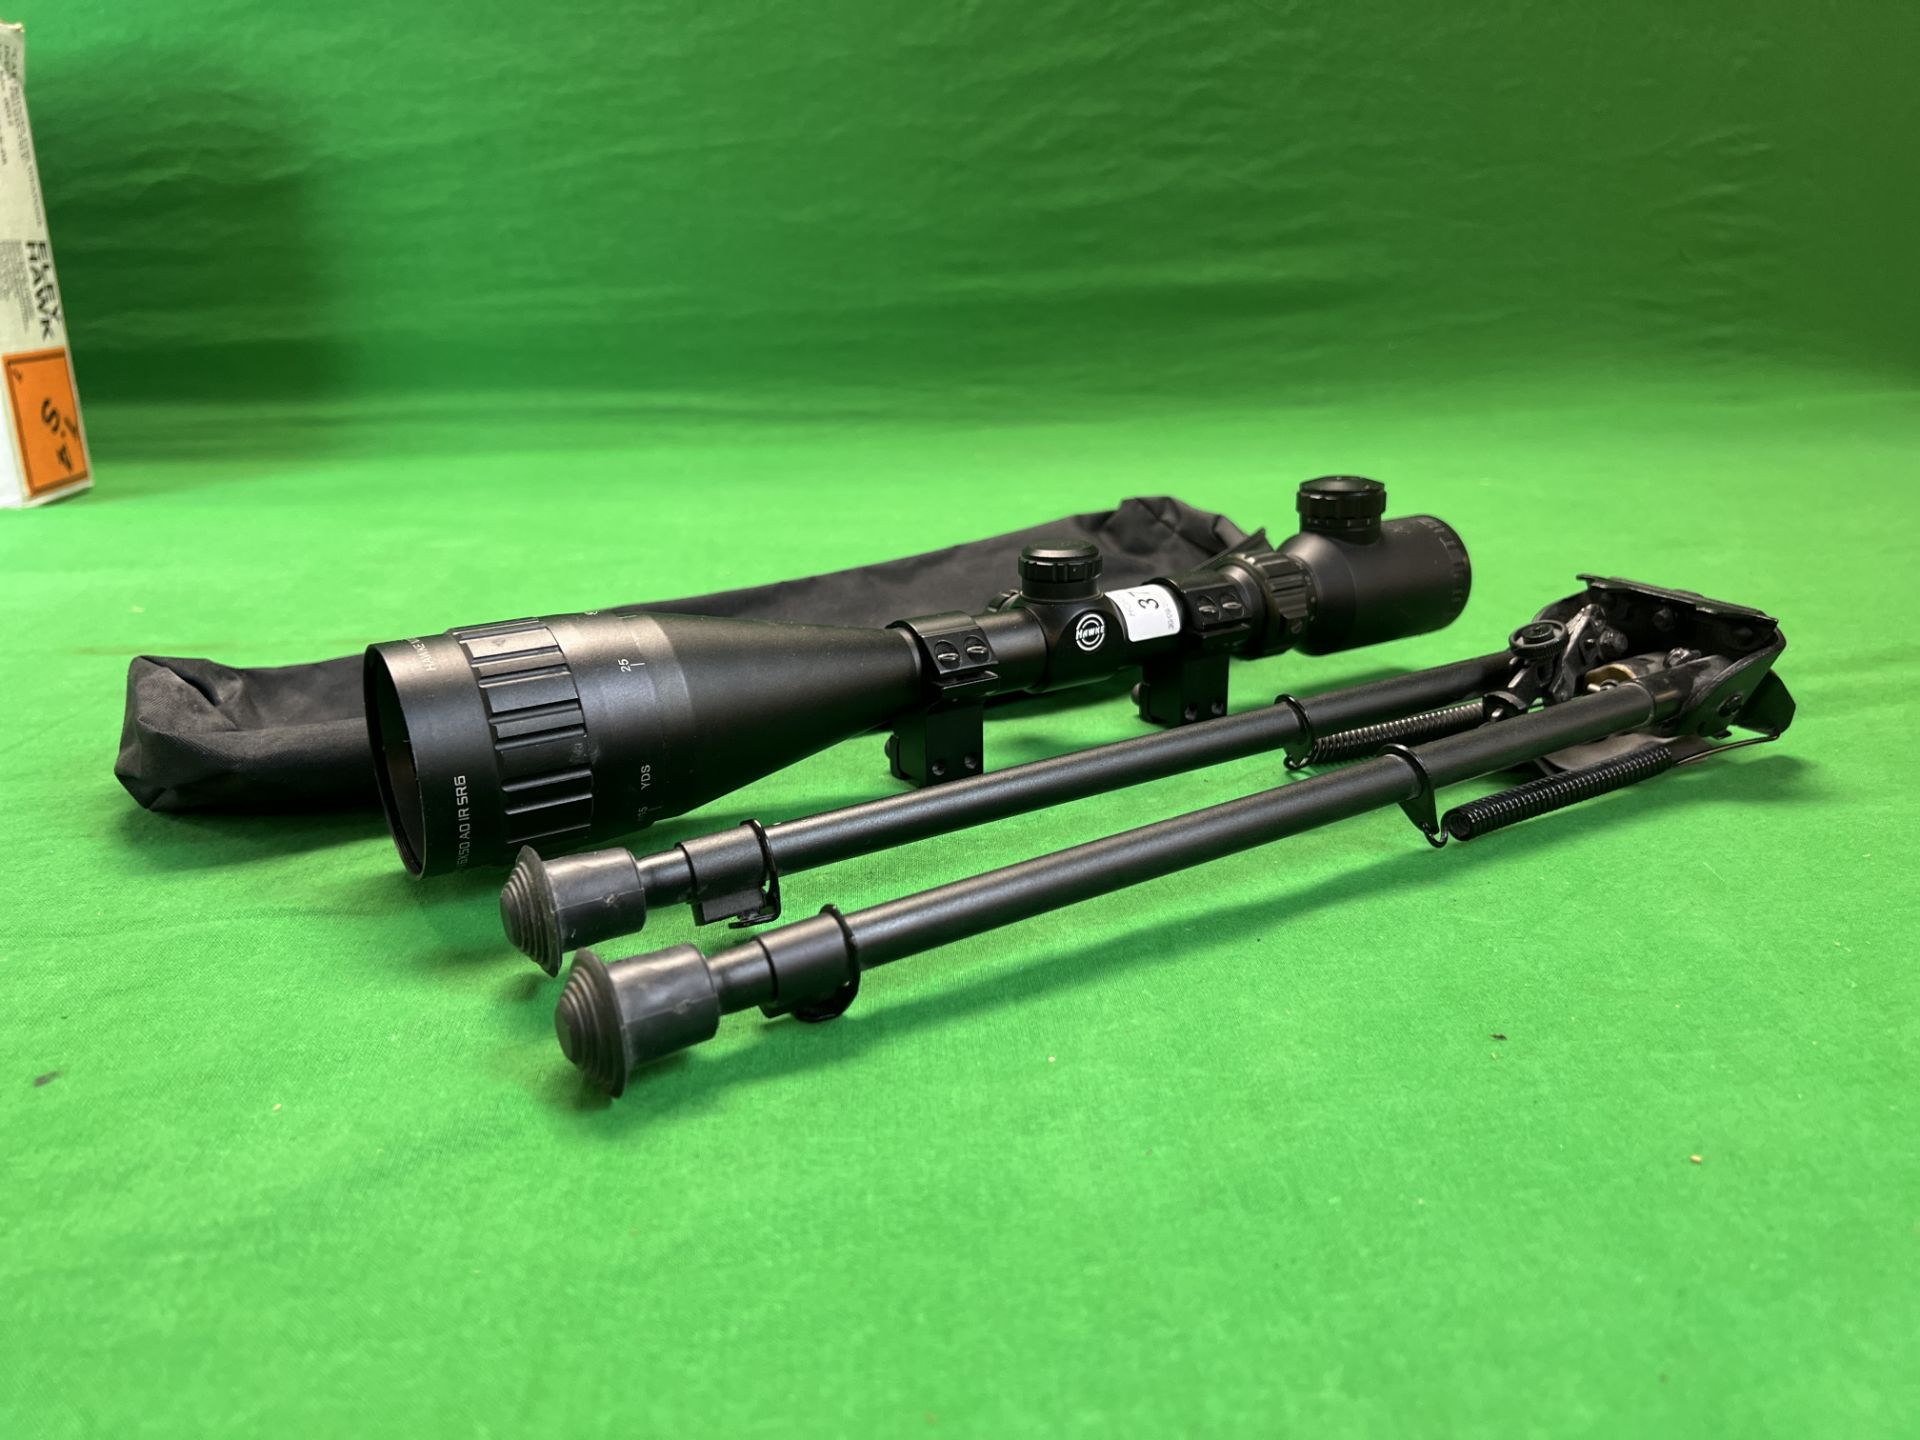 HAWKE NITE-EYE 4-16X50 AO IR SR6 RIFLE SCOPE COMPLETE WITH MOUNTS AND CANVAS BAG ALONG WITH RIFLE - Image 7 of 7